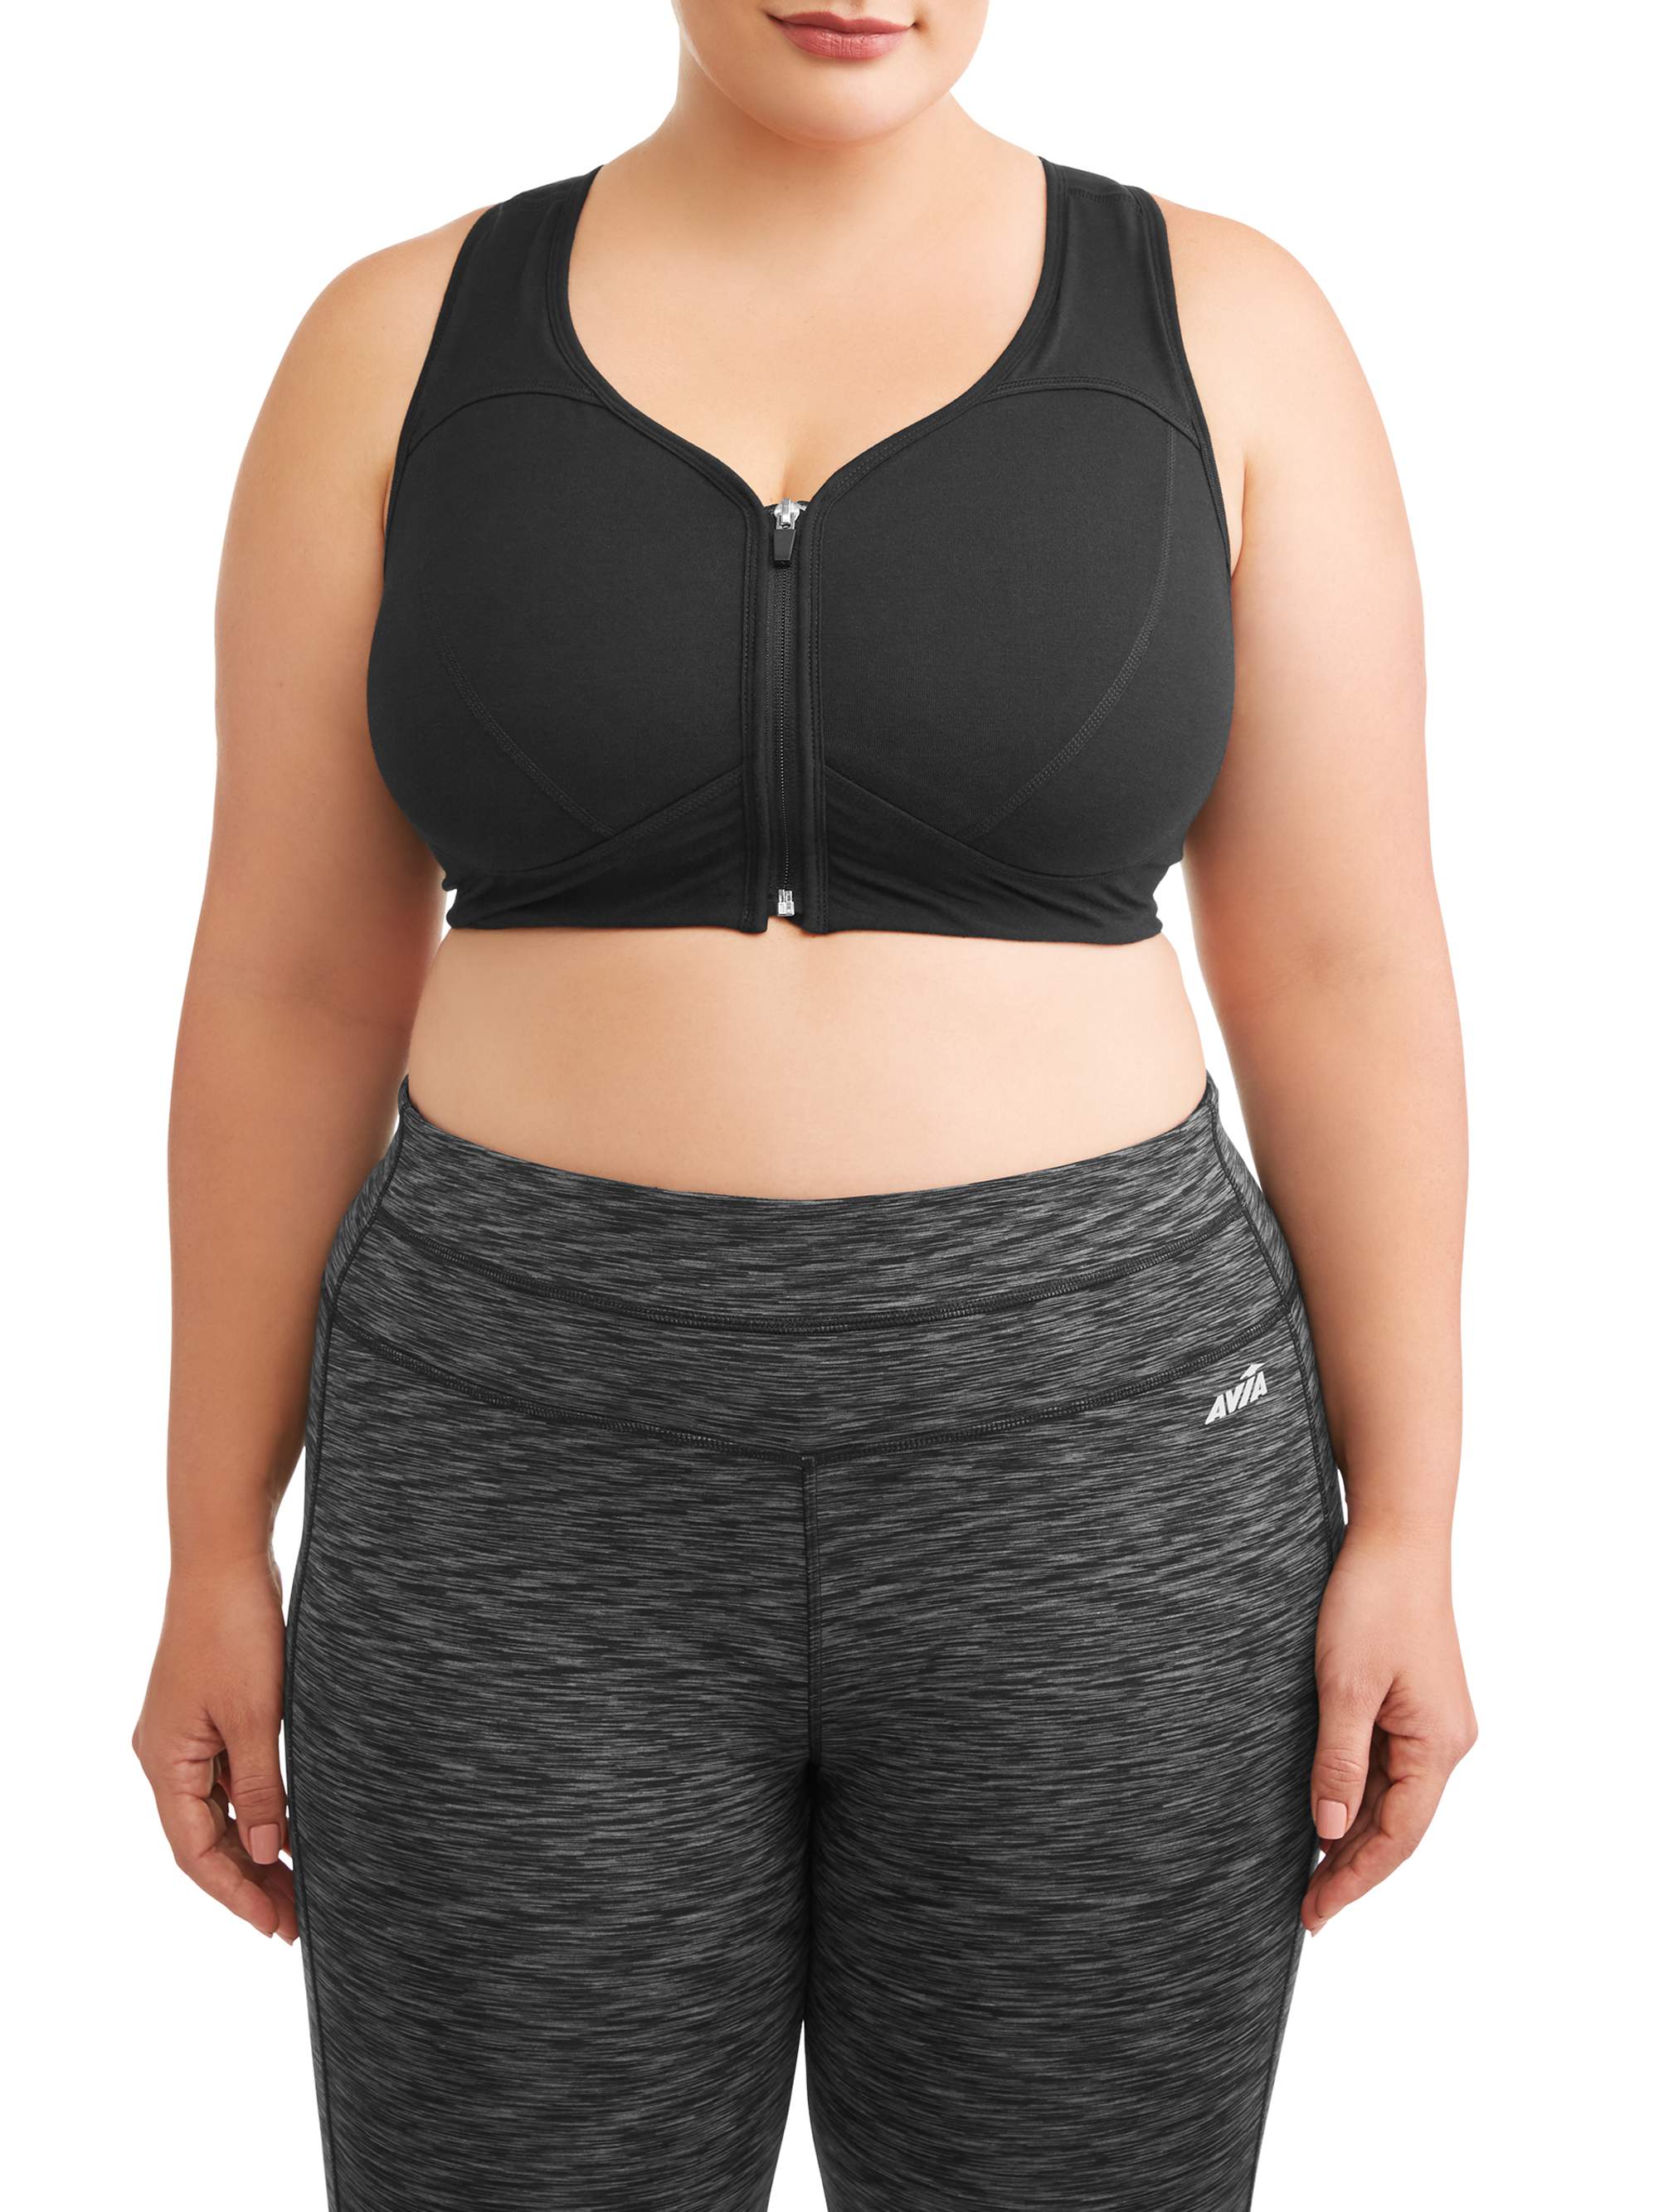 Athletic Works Women's Plus Size Zip Front Sports Bra - image 1 of 5